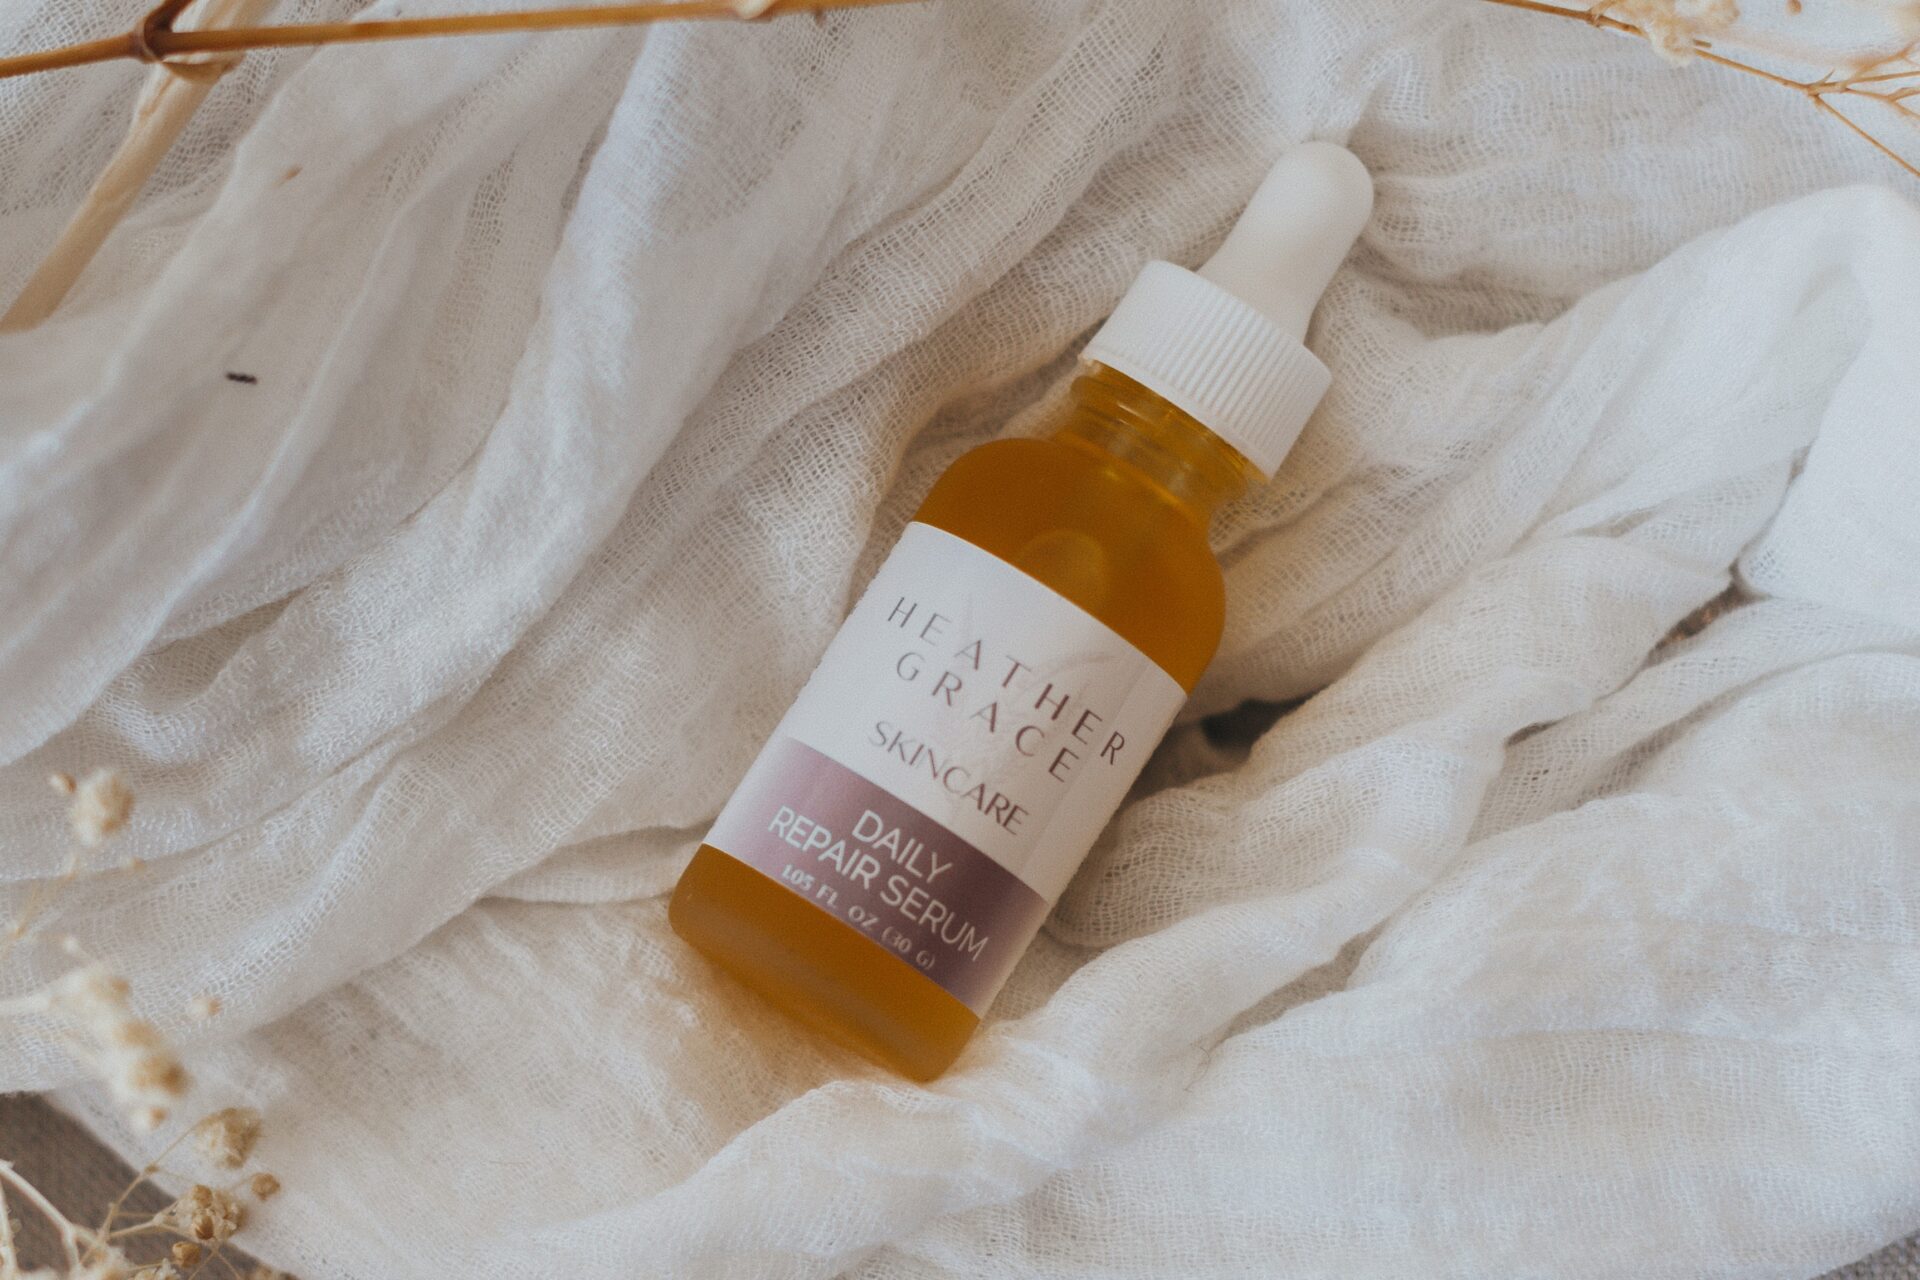 A bottle of Heather Grace Skincare Daily Repair Serum is nestled gently among folds of a soft, white gauzy fabric. Delicate dried baby's breath and wispy pampas grass in muted autumnal hues add a natural and serene touch to the composition, evoking a sense of gentle care and organic beauty. The scene suggests a peaceful, calming atmosphere, reminiscent of a quiet moment of self-care and rejuvenation.